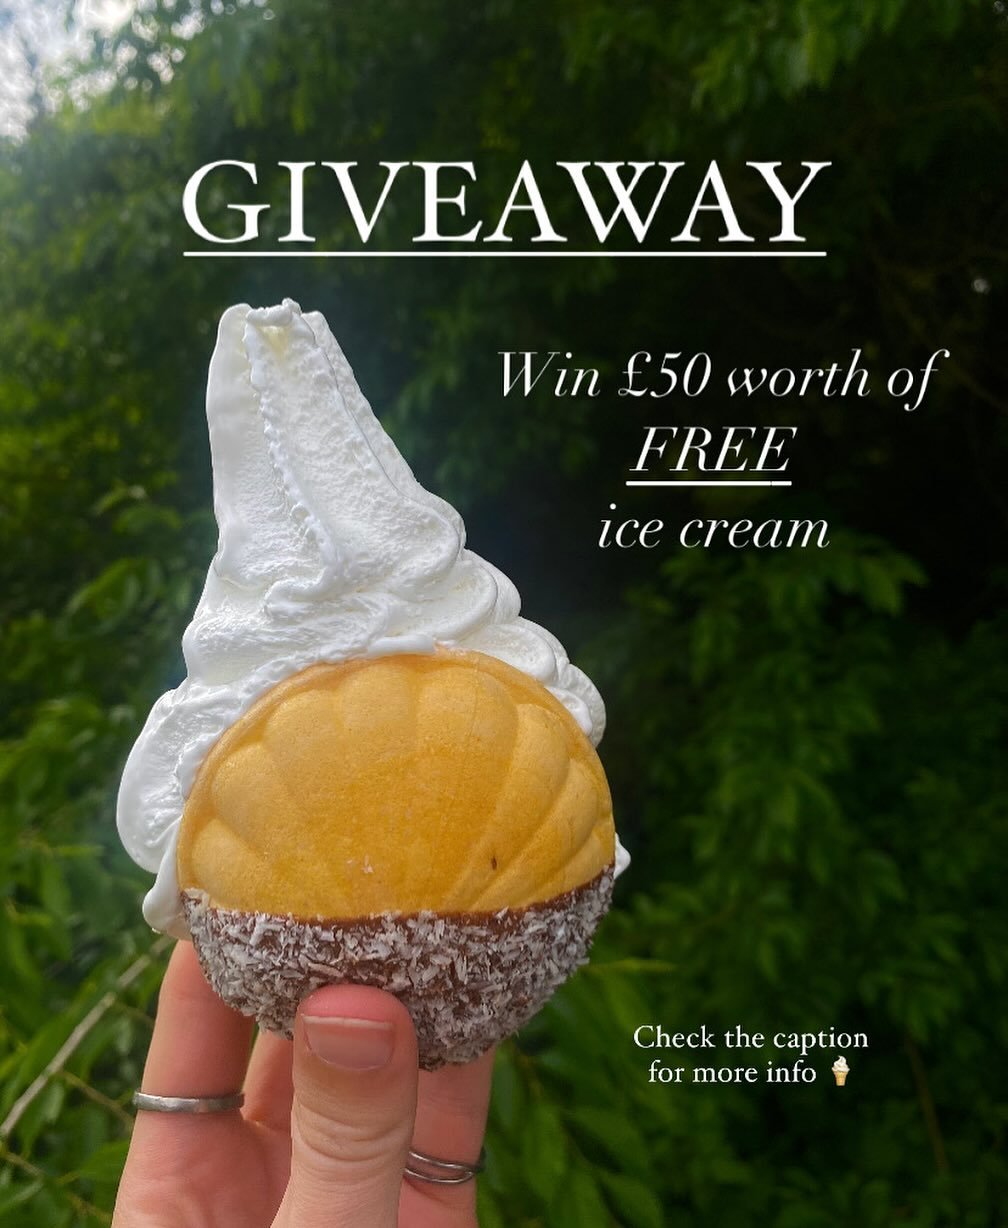 ✨GIVEAWAY TIME!!!✨

For a chance to win &pound;50 worth of FREE ice cream, all you have to do is:

&bull; Follow us on Facebook/ Instagram
&bull; Like and Share this post
&bull; Tag 3 friends who you&rsquo;d share an ice cream with 🍦

Winner will be